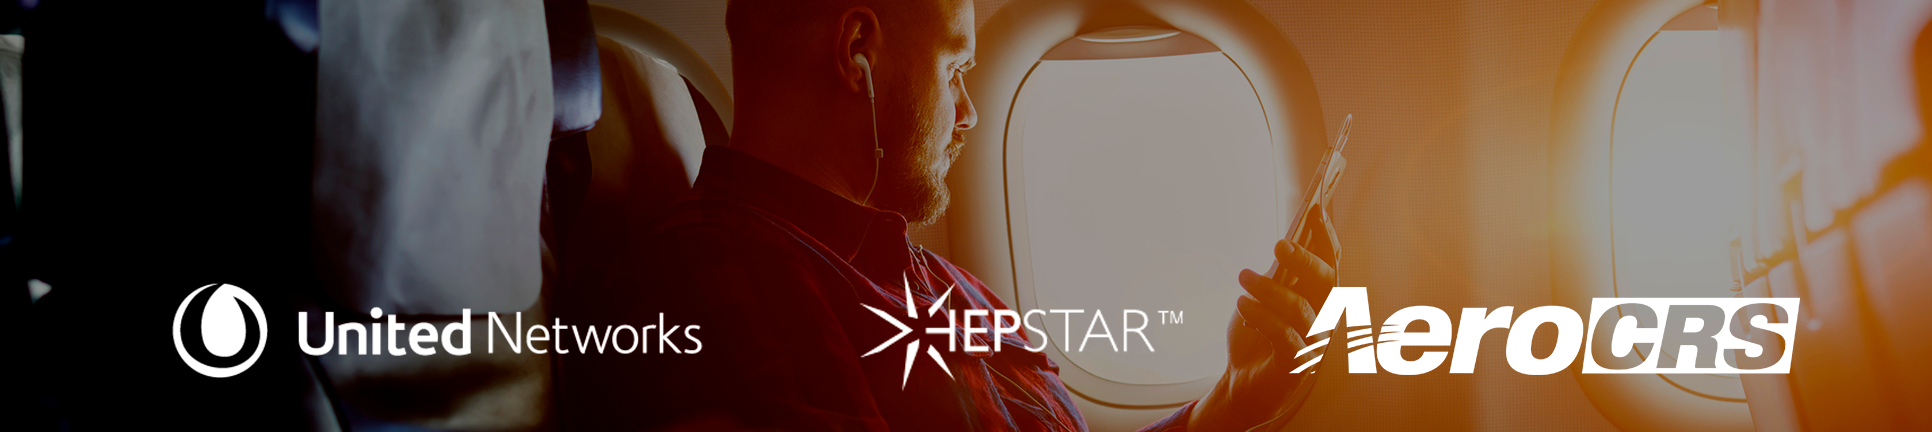 man sitting at airplane window holding a phone with logos of aerocrs, united networks and hepstar